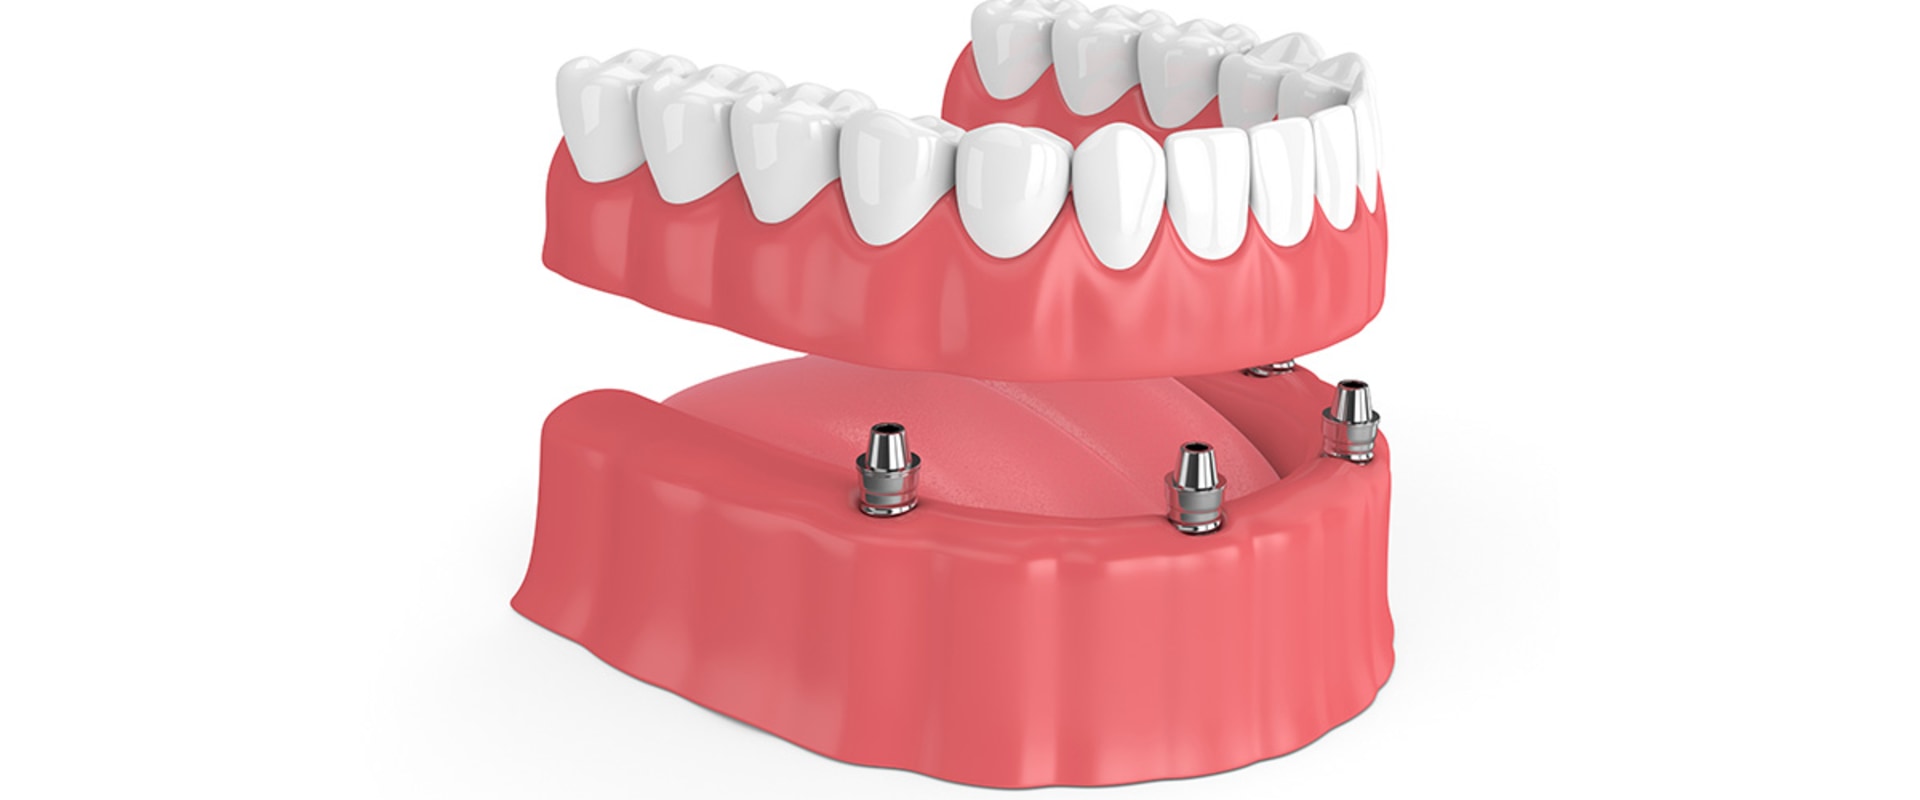 Implant Supported Dentures vs. Traditional Dentures: Which is More Comfortable?